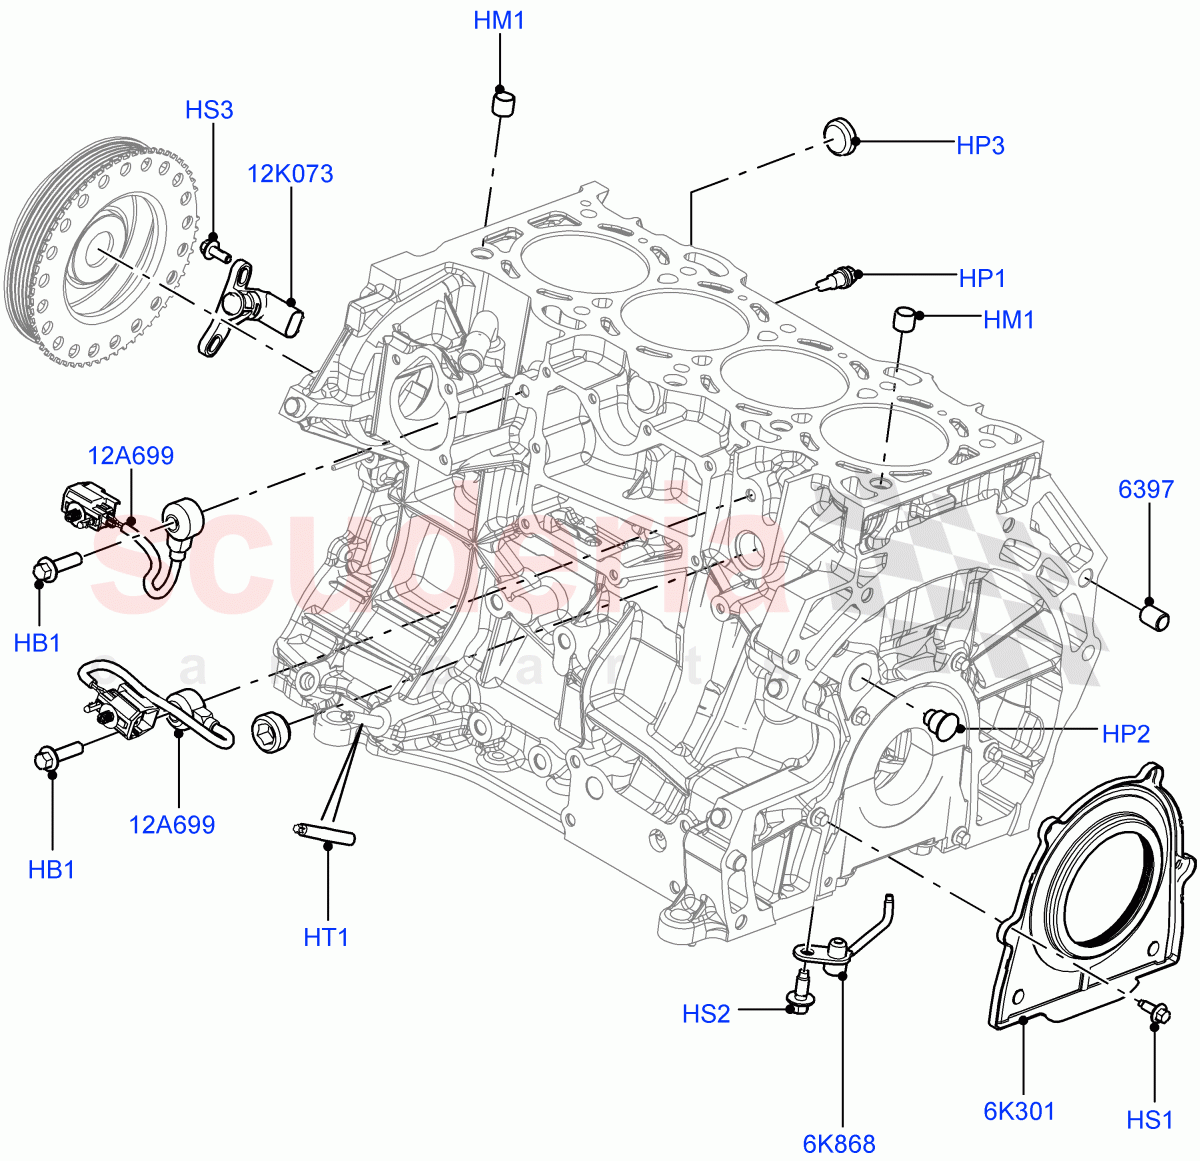 Cylinder Block And Plugs(2.0L 16V TIVCT T/C 240PS Petrol,Changsu (China))((V)FROMEG000001) of Land Rover Land Rover Range Rover Evoque (2012-2018) [2.0 Turbo Petrol GTDI]